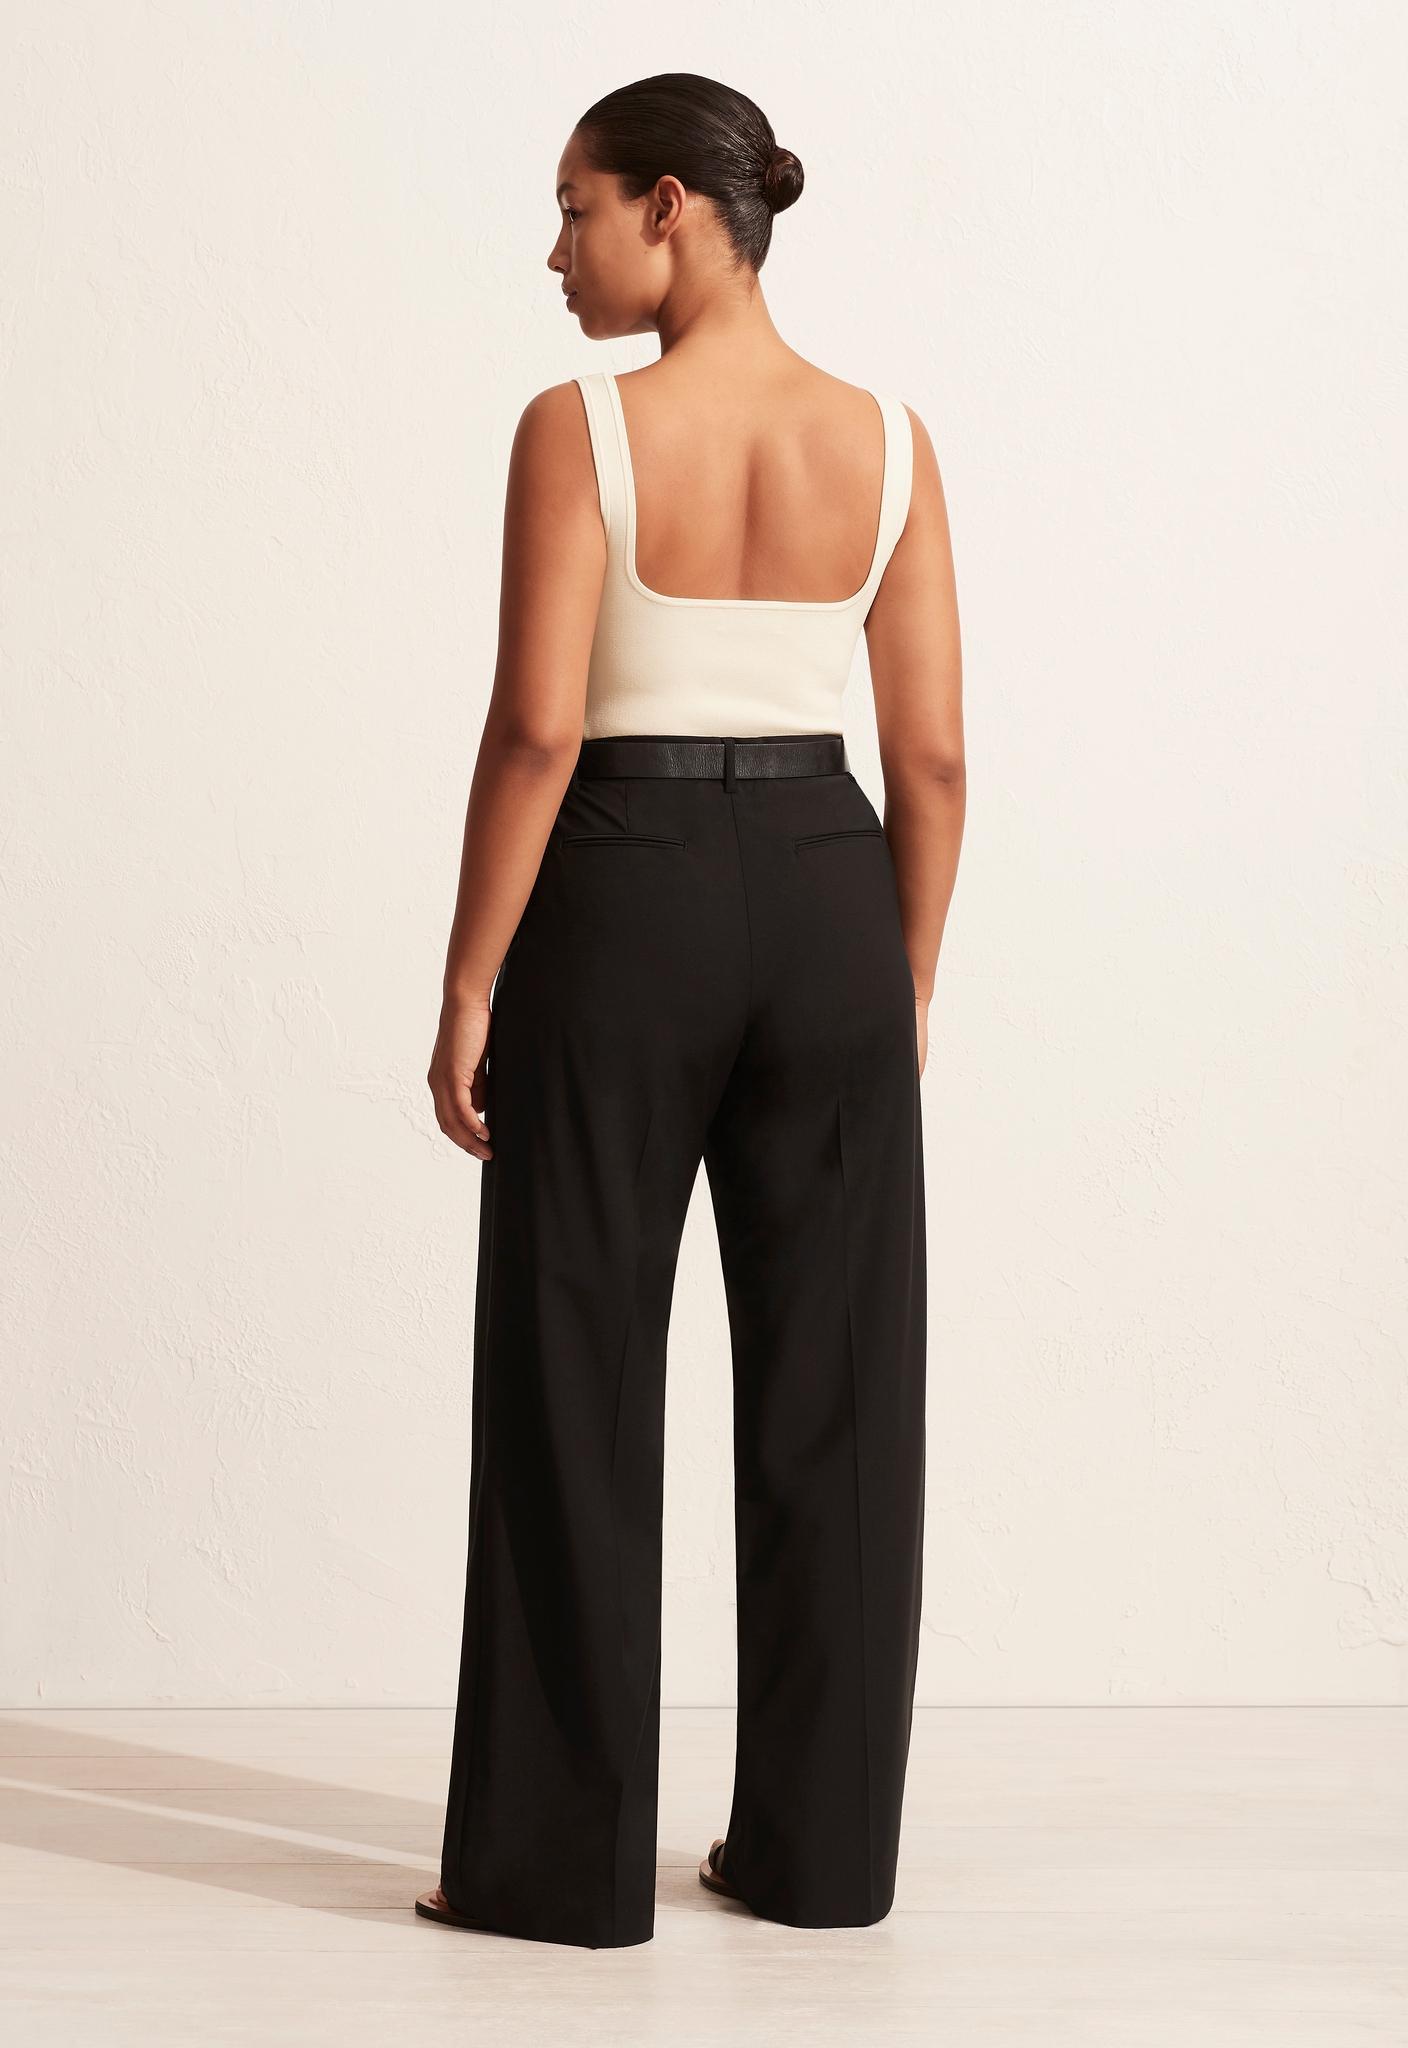 Relaxed Tailored Trouser - Black - Matteau